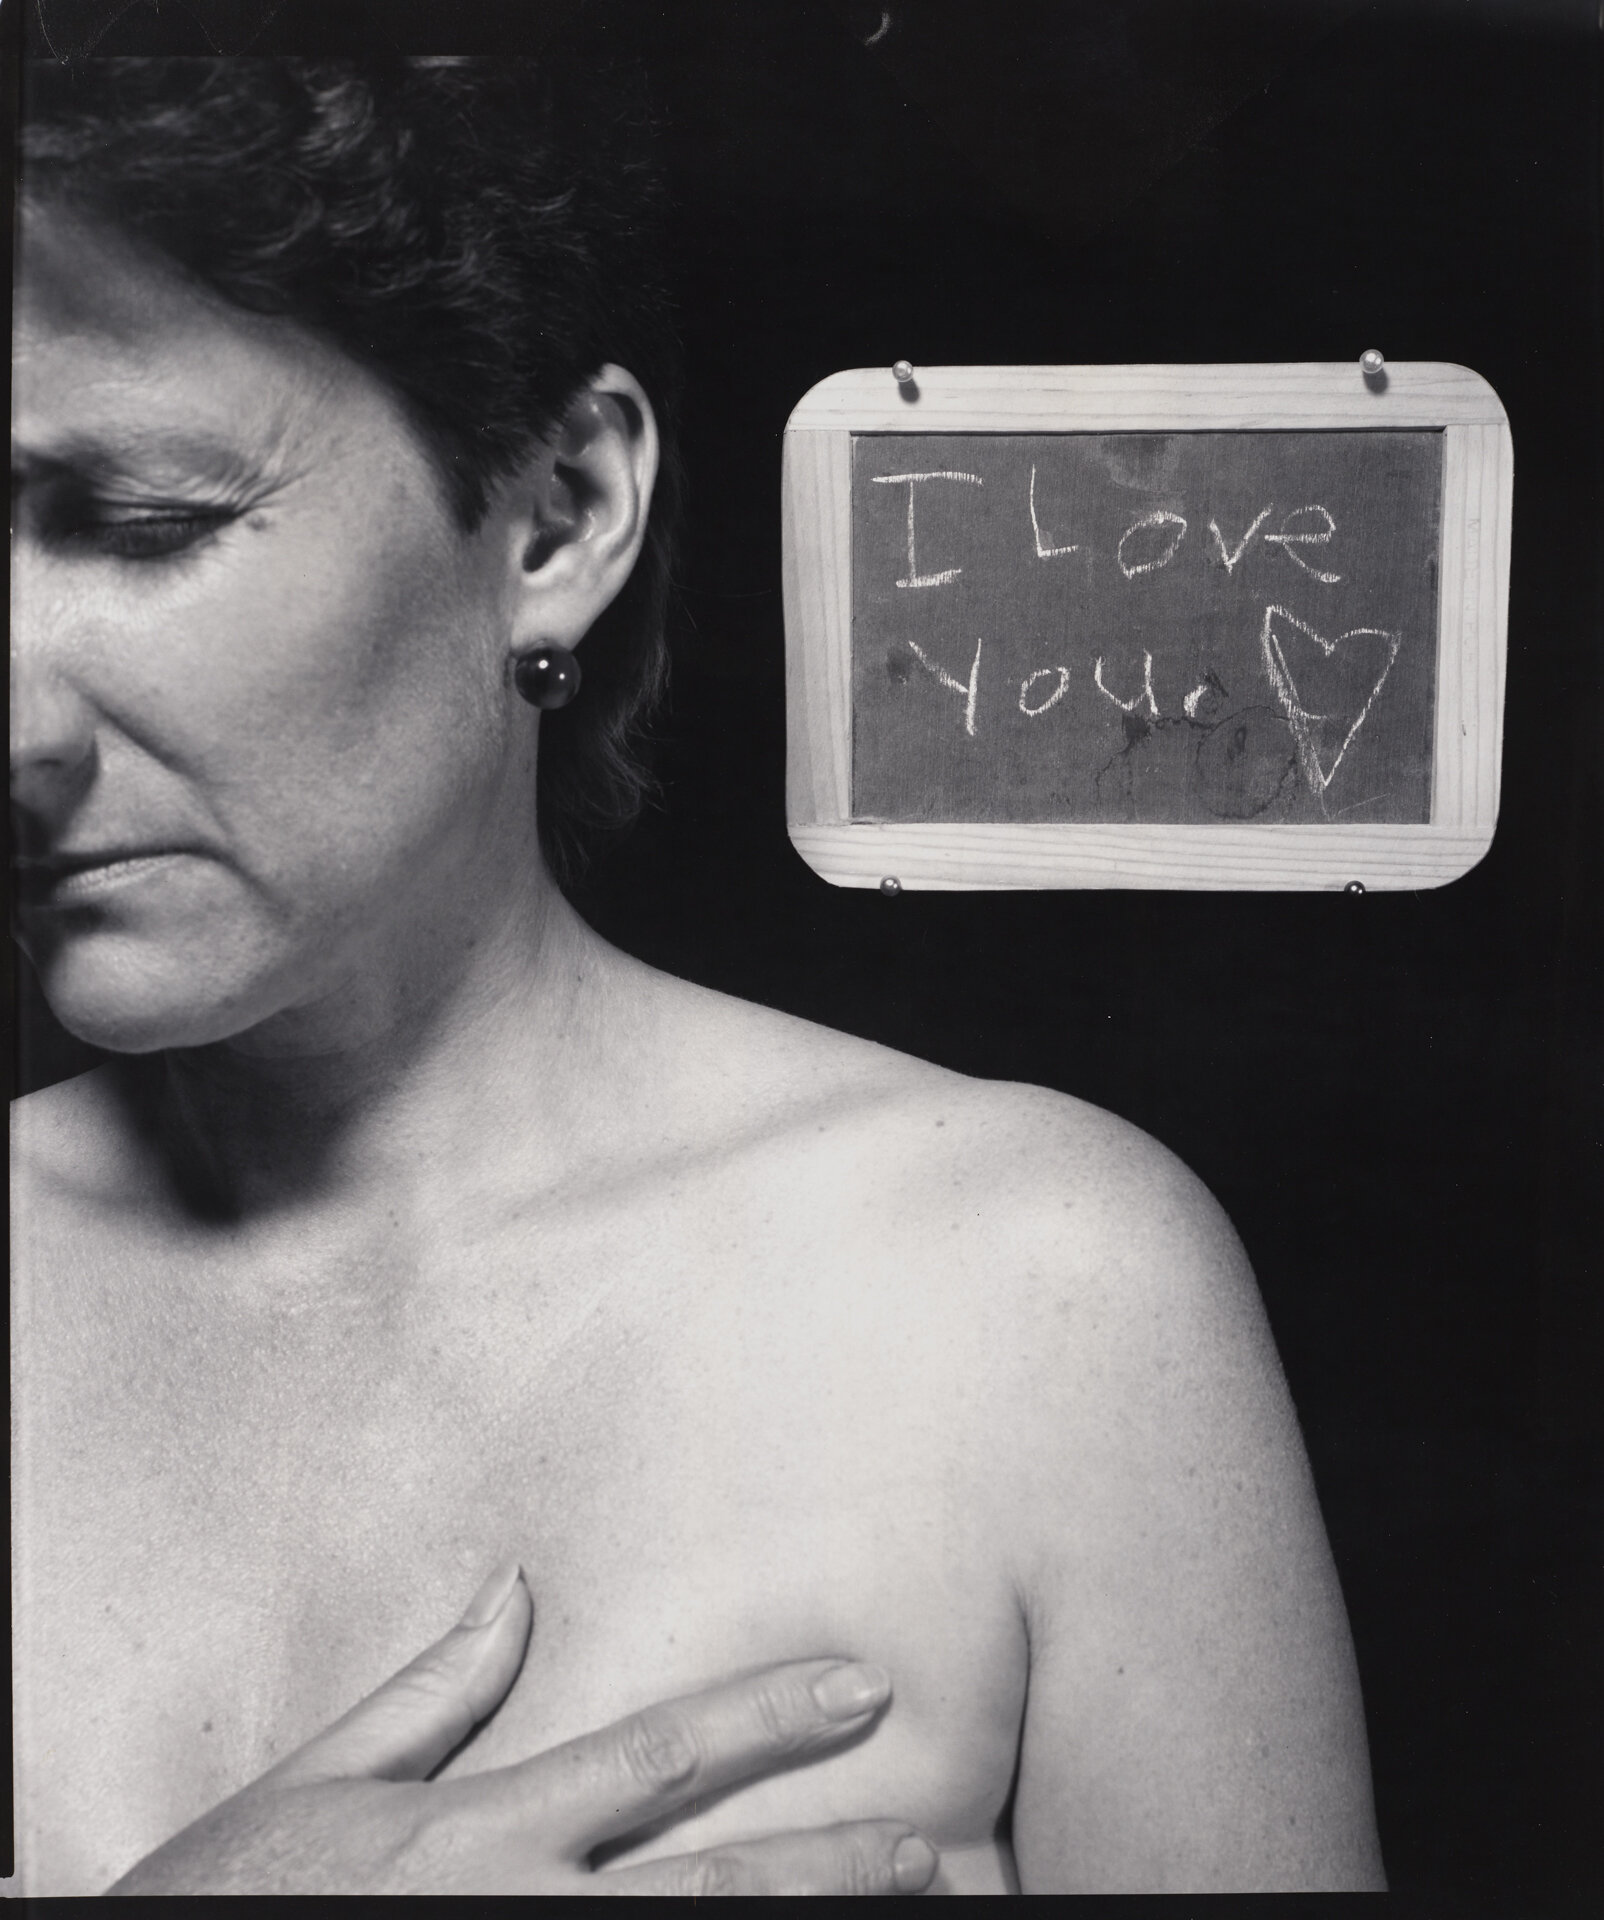   Bea Nettles  (American, b. 1946).  I Love You , 1987, from  Life’s Lessons.  Diffusion transfer print. George Eastman Museum, gift of the artist. © Bea Nettles 